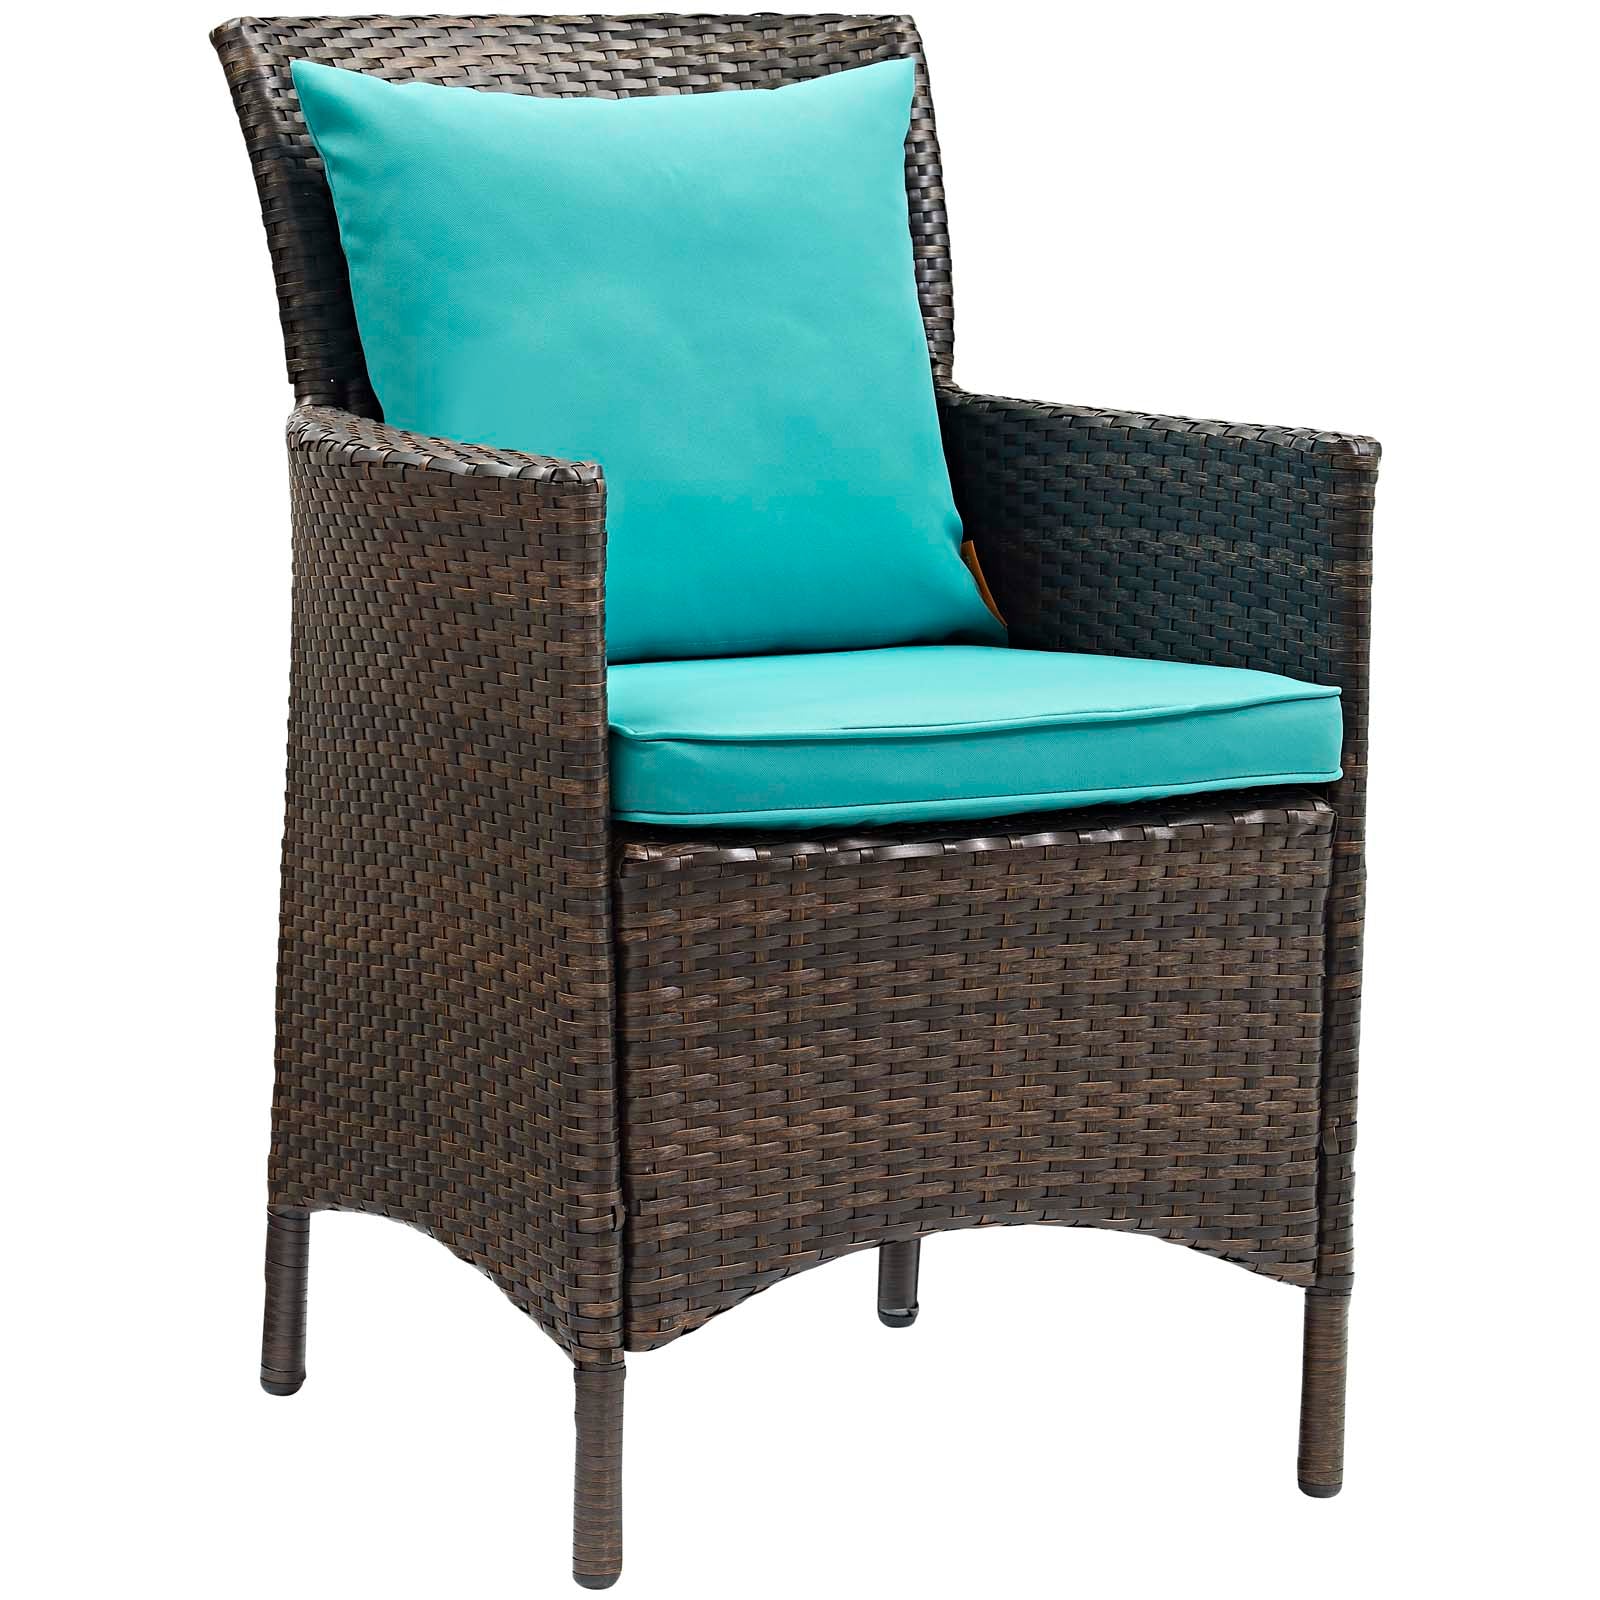 Modway Outdoor Dining Chairs - Conduit Outdoor Patio Wicker Rattan Dining Armchair Set of 2 Brown Turquoise